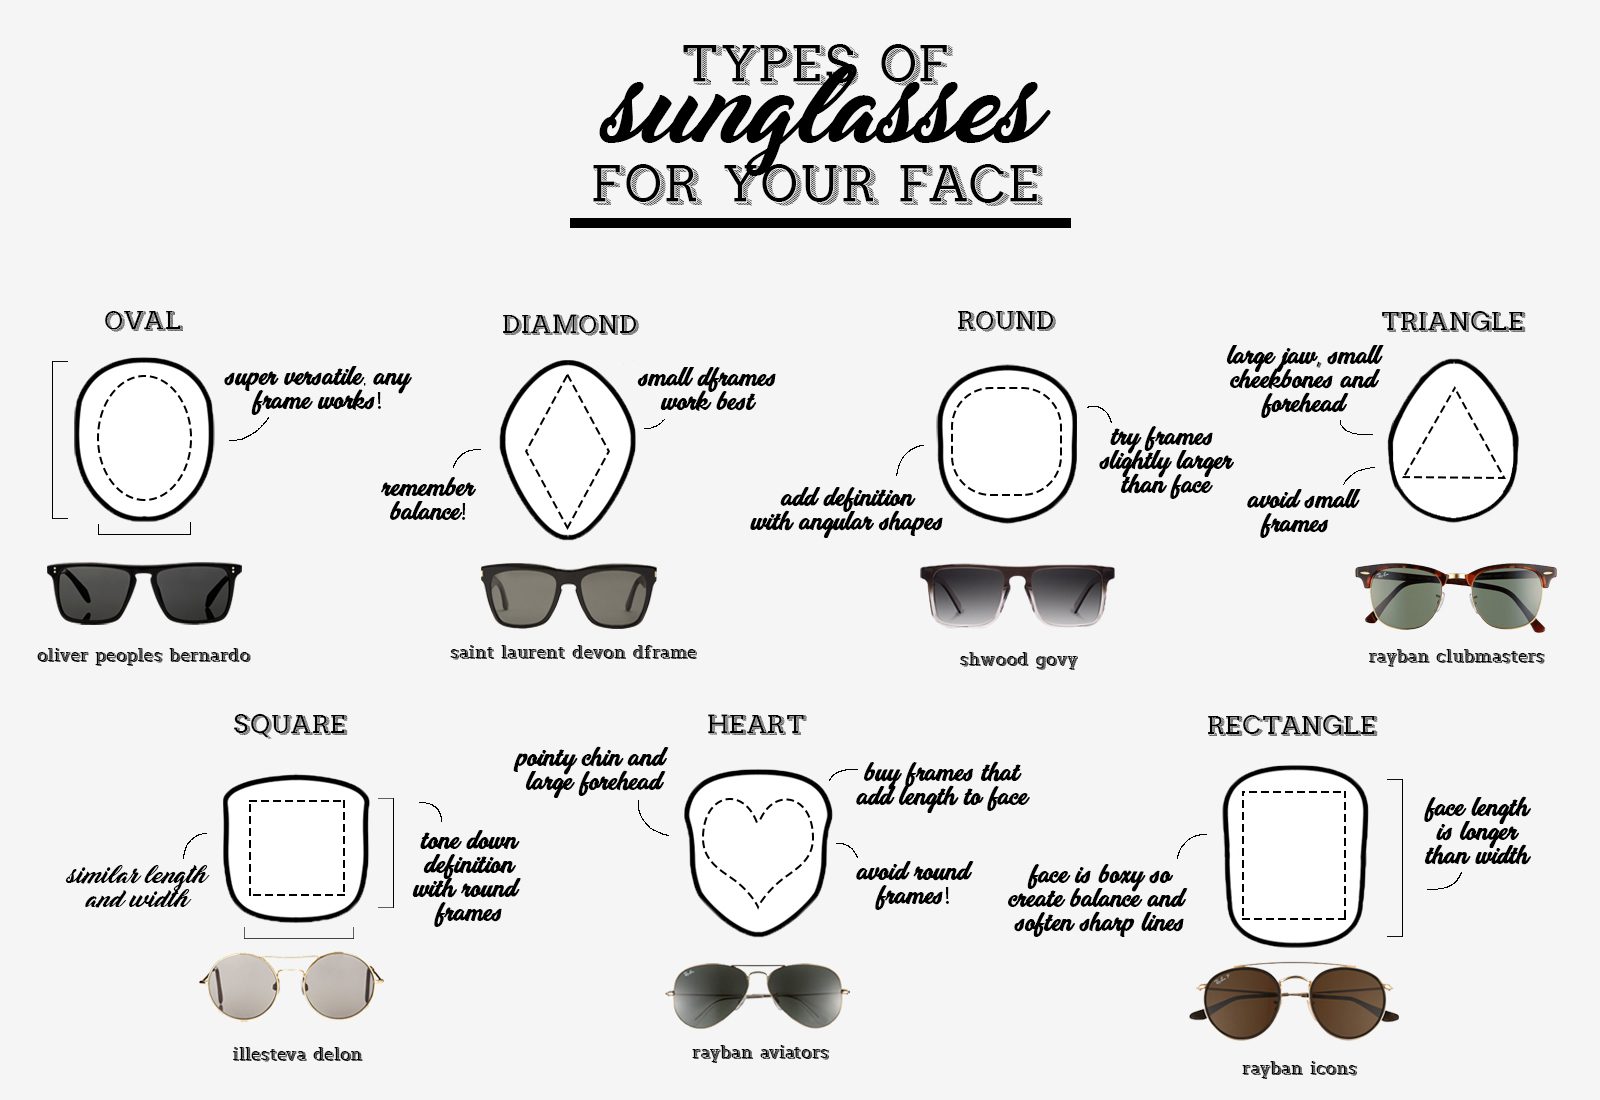 types of sunglasses for your face infographic